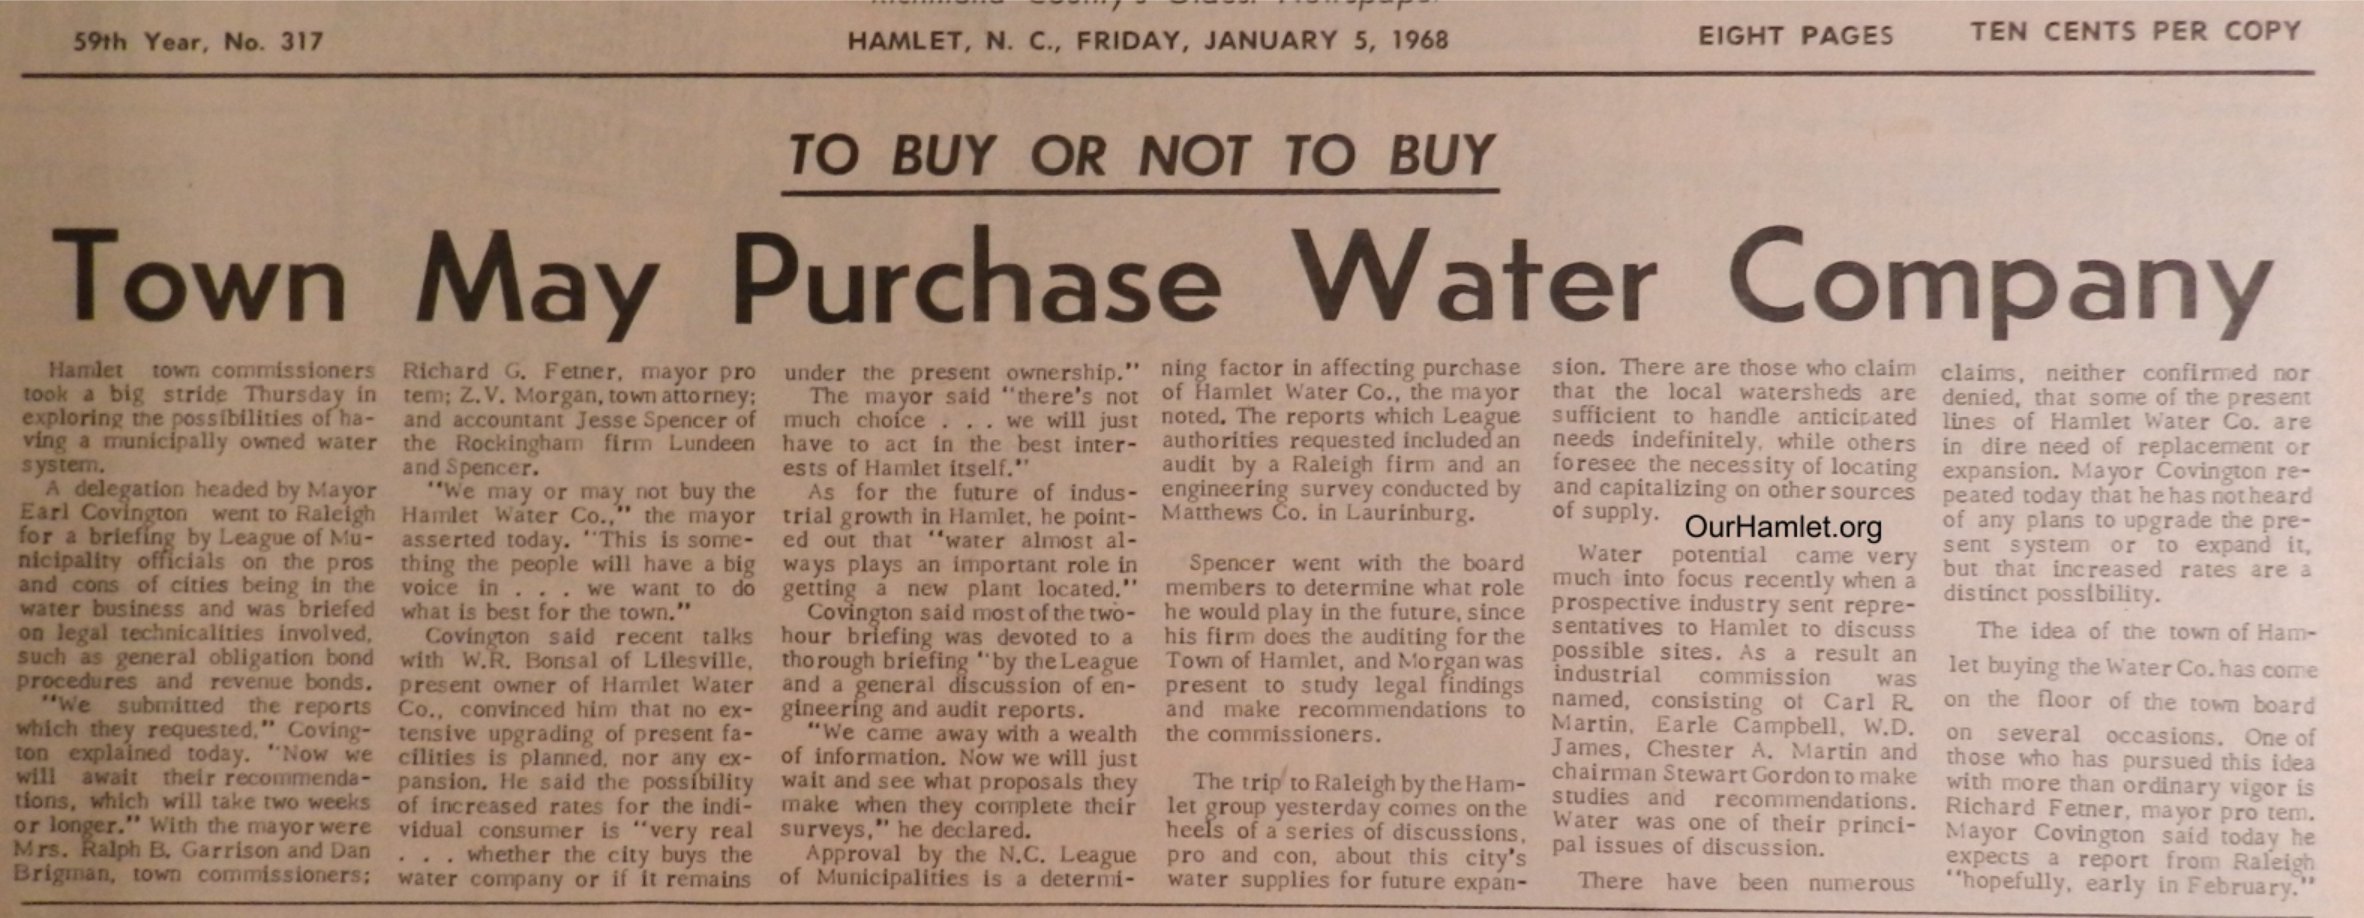 1968 Water Plant purchase OH 2.jpg